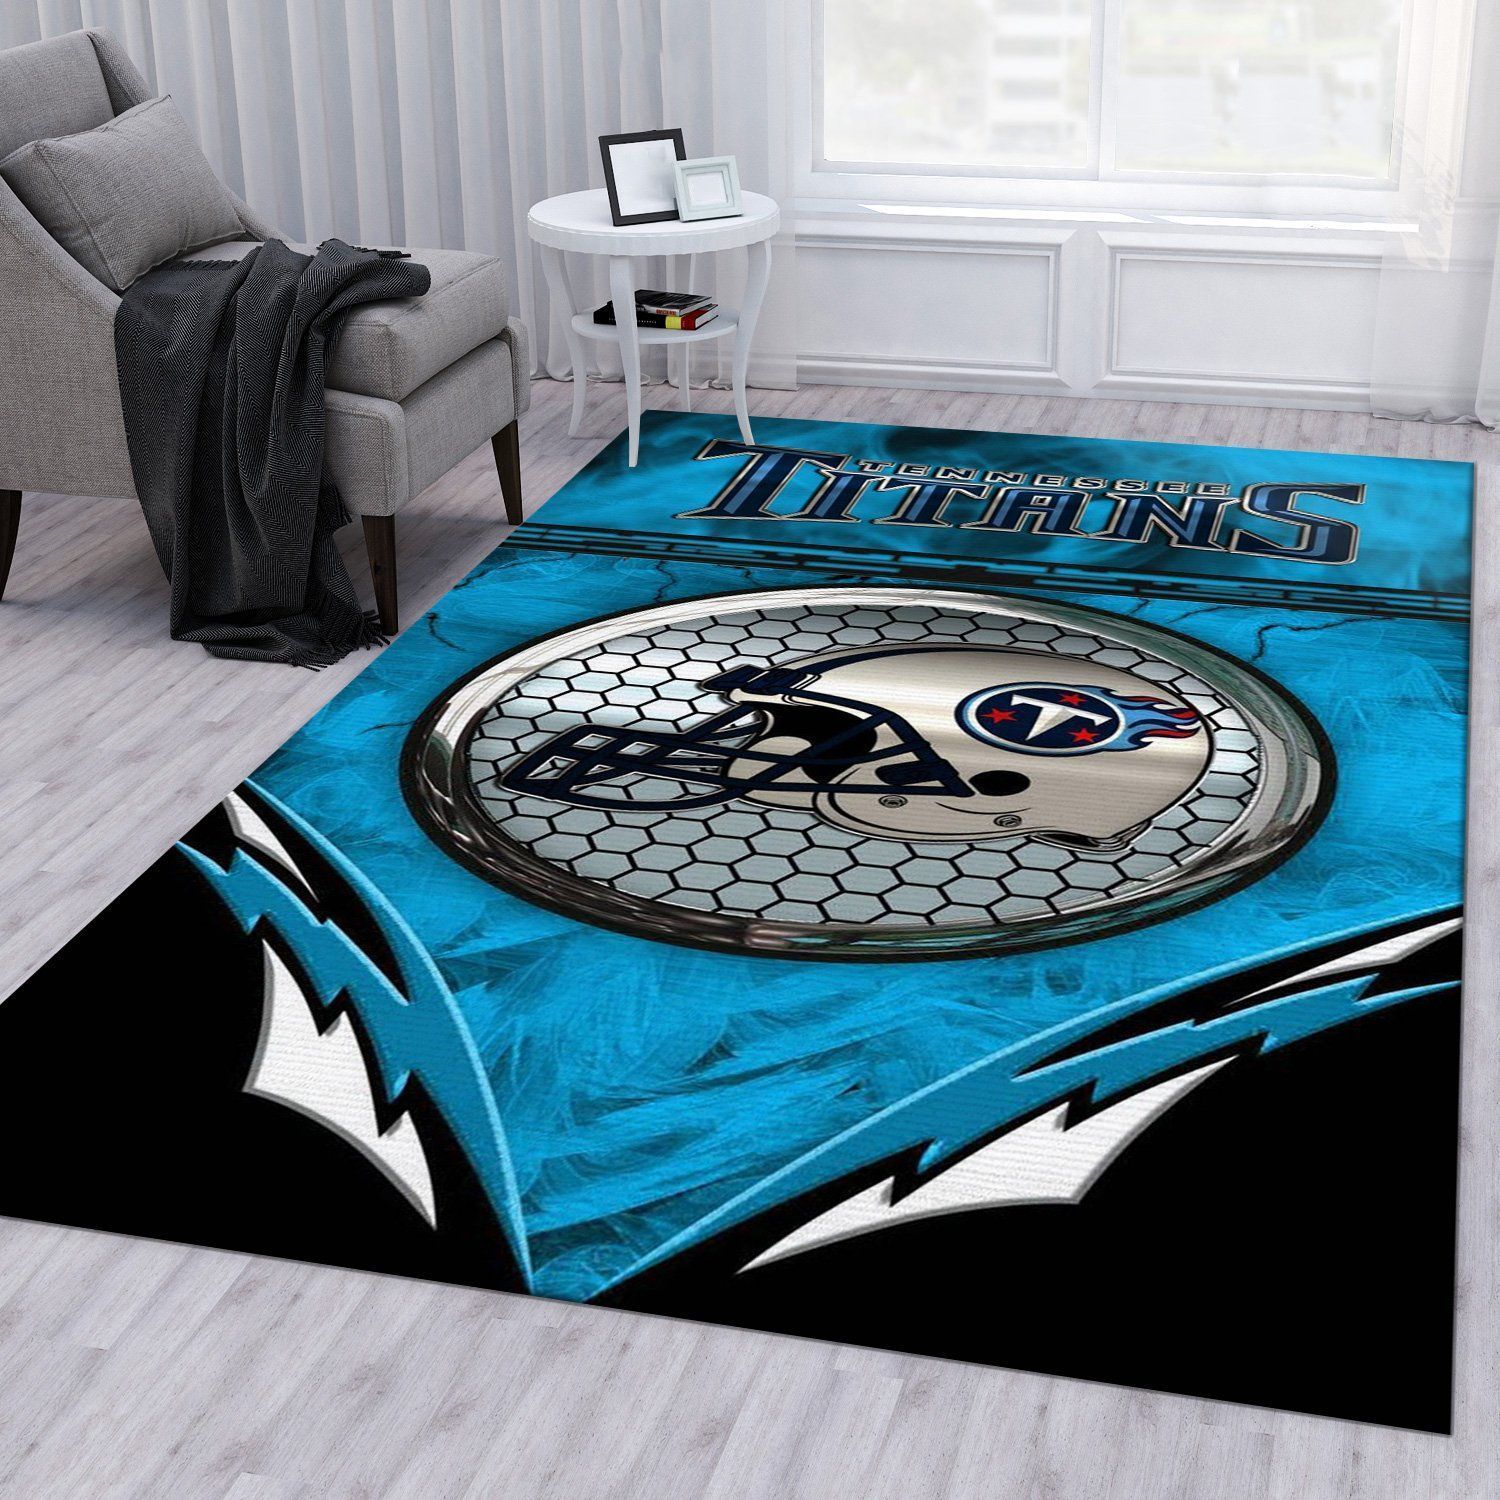 Tennessee Titans 2 NFL Christmas Gift Rug Living Room Rug Home Decor Floor Decor - Indoor Outdoor Rugs 1